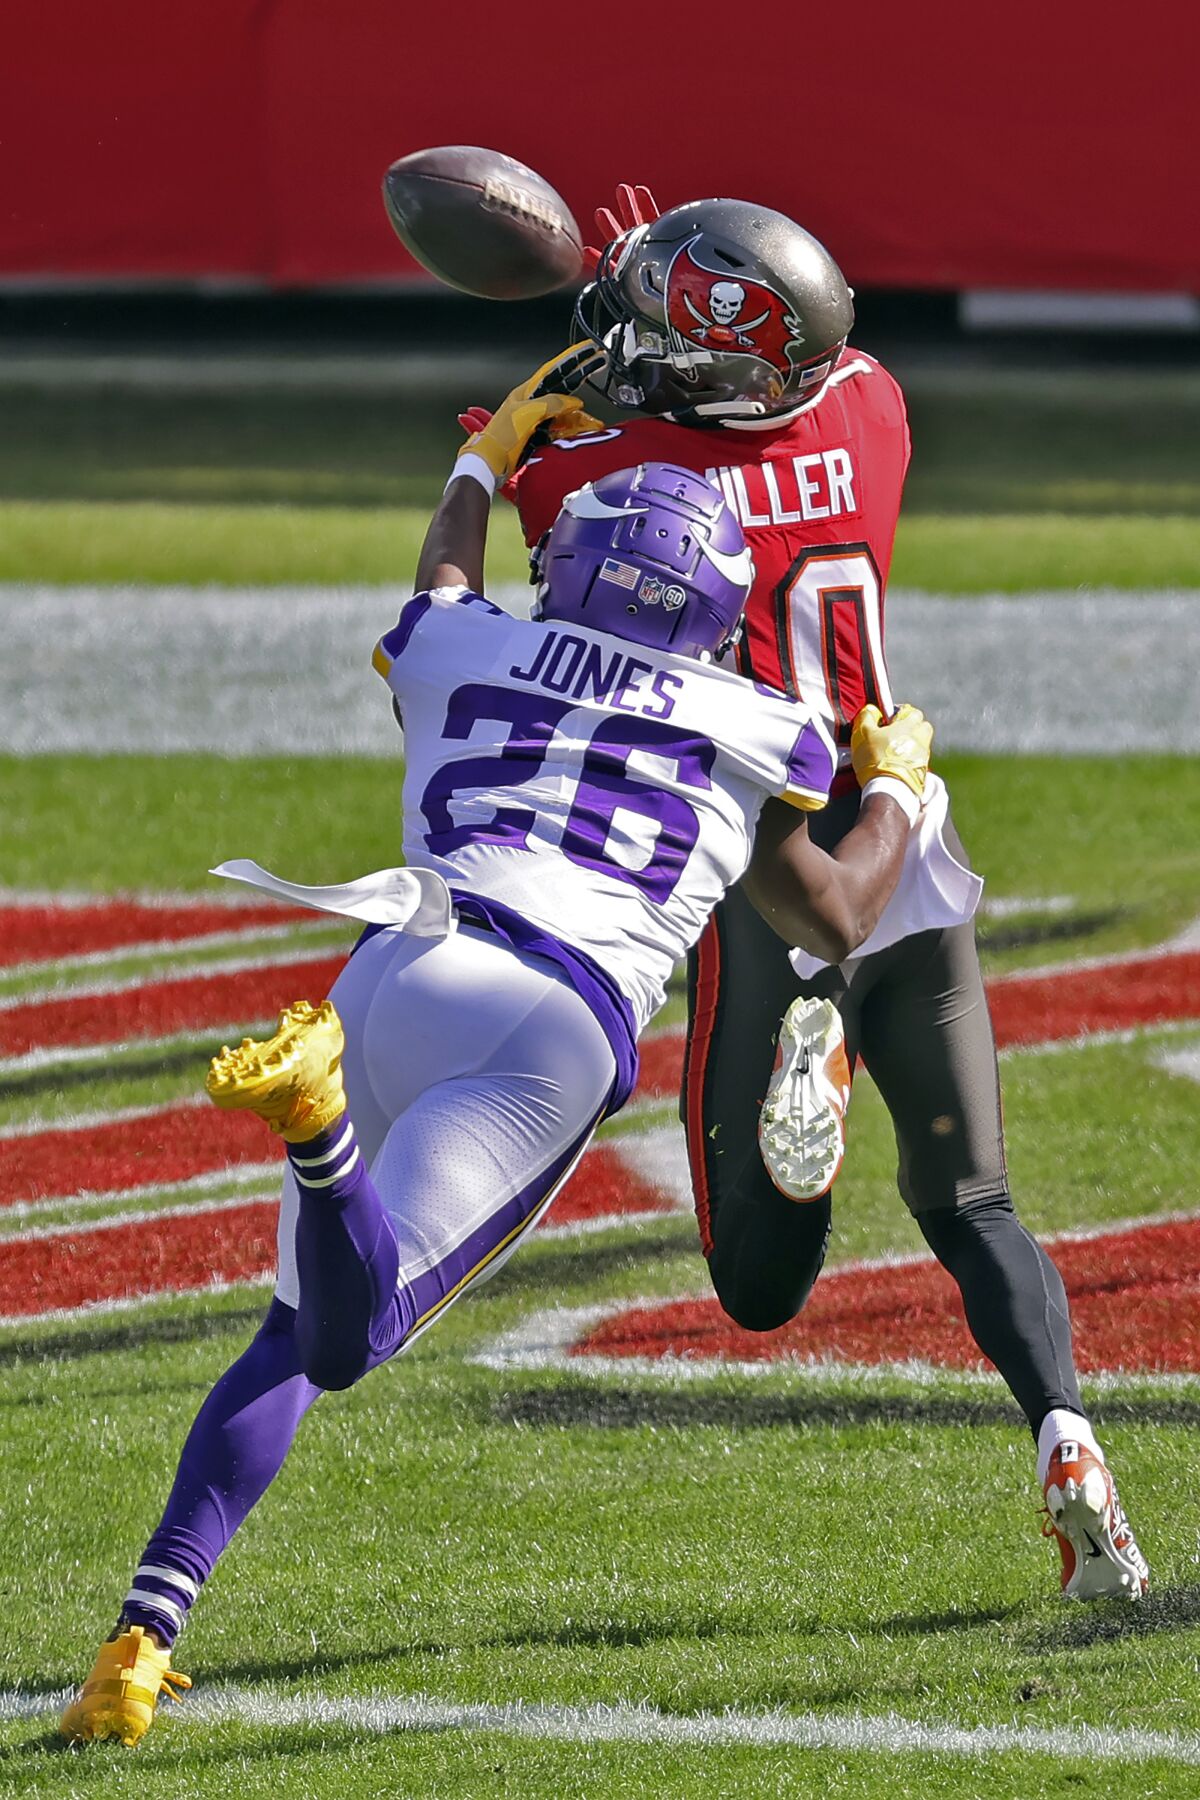 Tampa Bay Buccaneers wide receiver Scott Miller (10) pulls in a 48-yard touchdown pass from Tom Brady after getting in front of Minnesota Vikings defensive back Chris Jones (26) during the first half of an NFL football game Sunday, Dec. 13, 2020, in Tampa, Fla. (AP Photo/Mark LoMoglio)